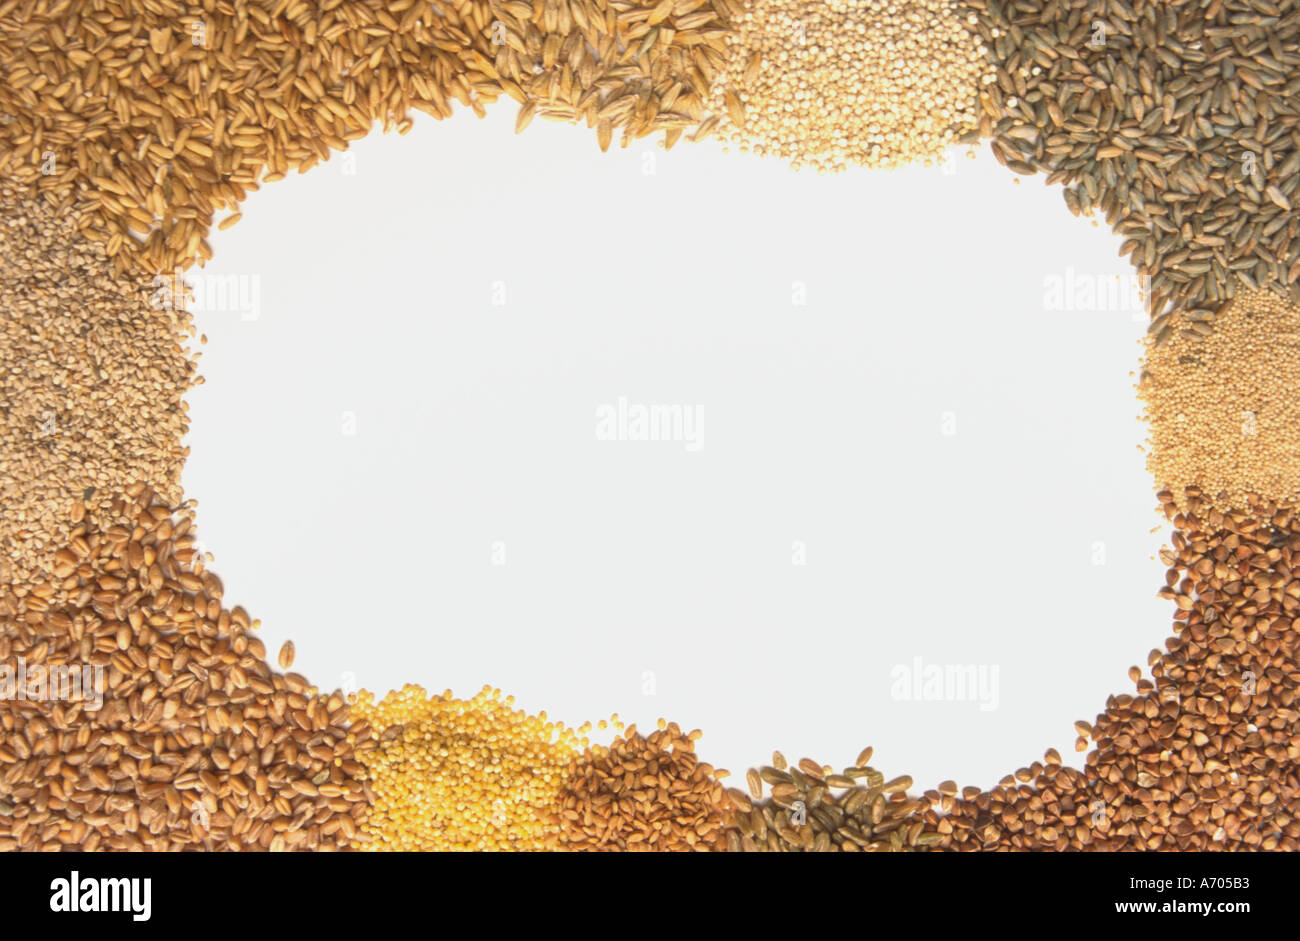 food frame made of various cereals Stock Photo